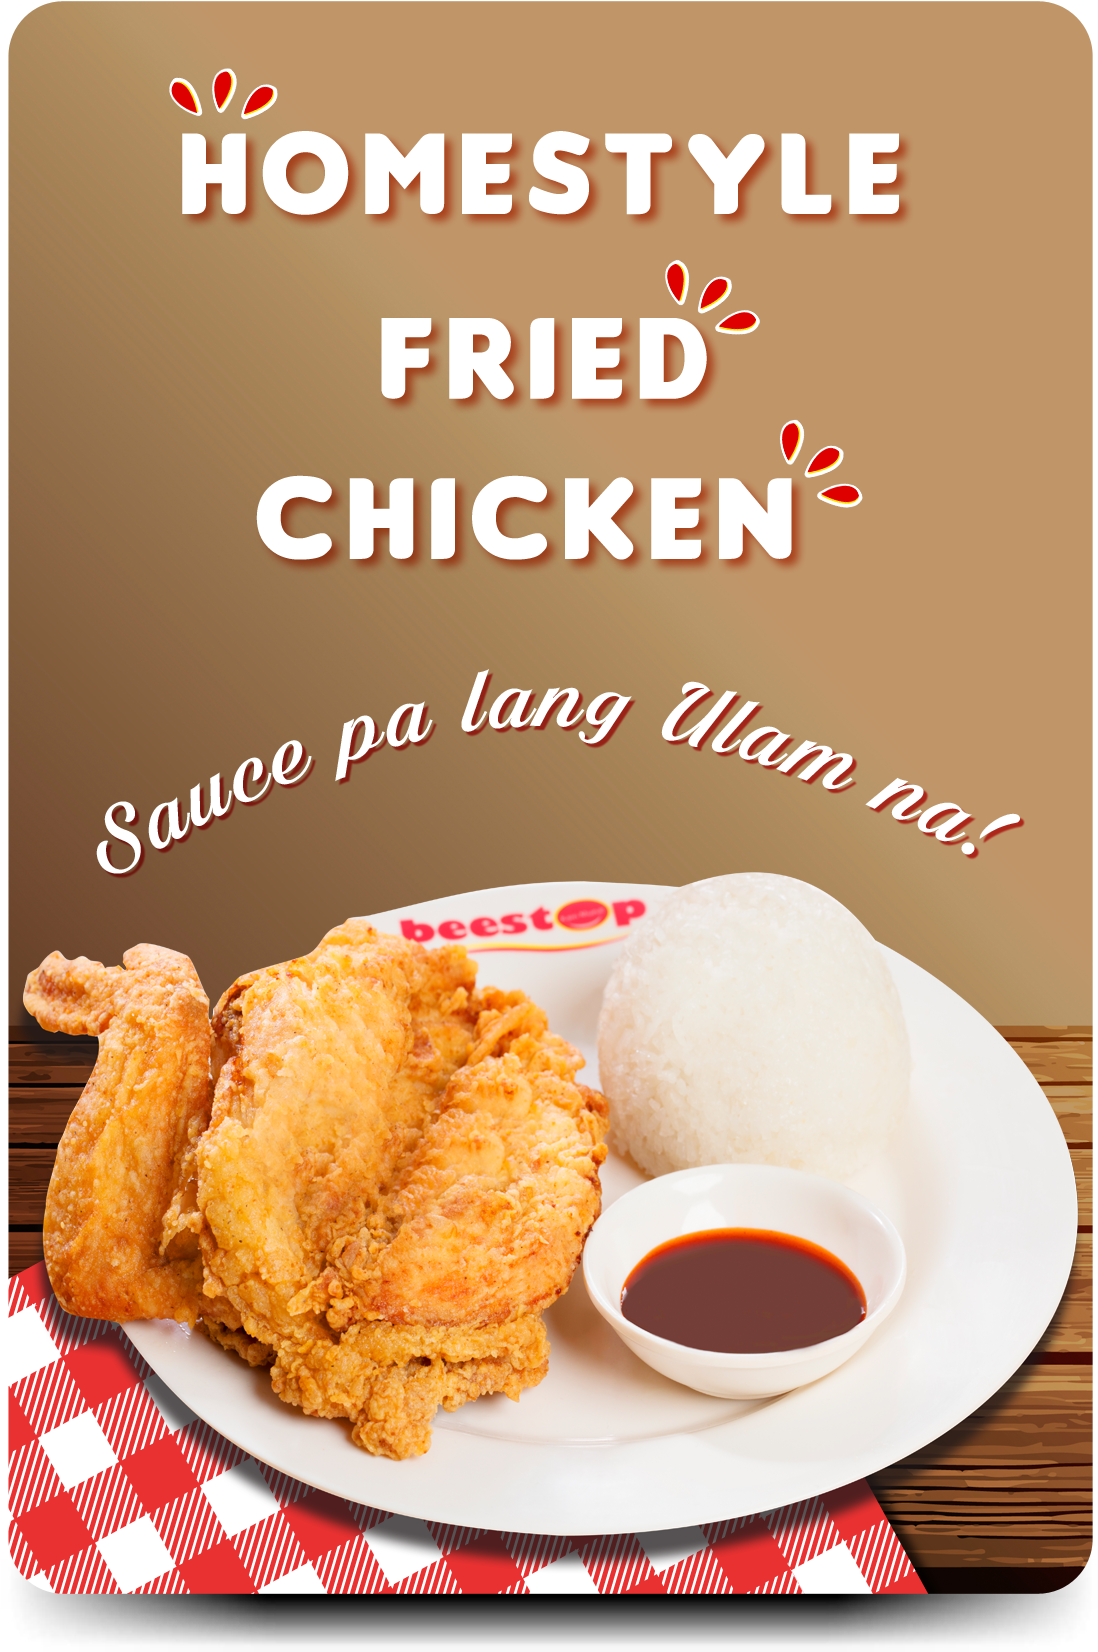 Homestyle Fried Chicken Advert PNG image